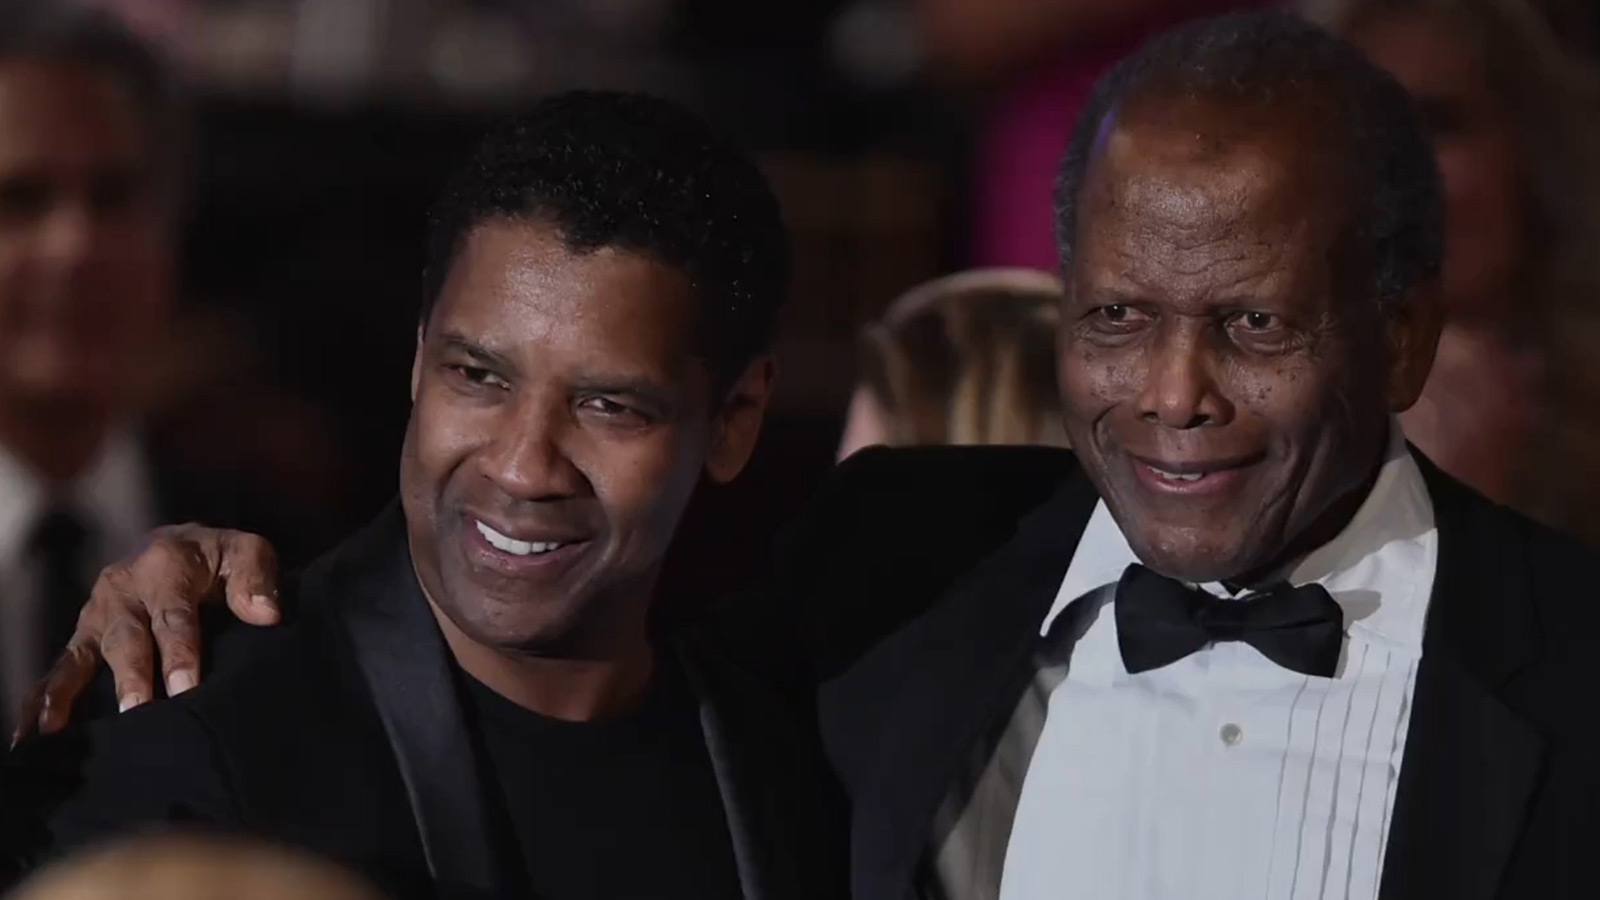 Denzel Washington has praised the late Sidney Poitier for “opening doors” to people of colour.